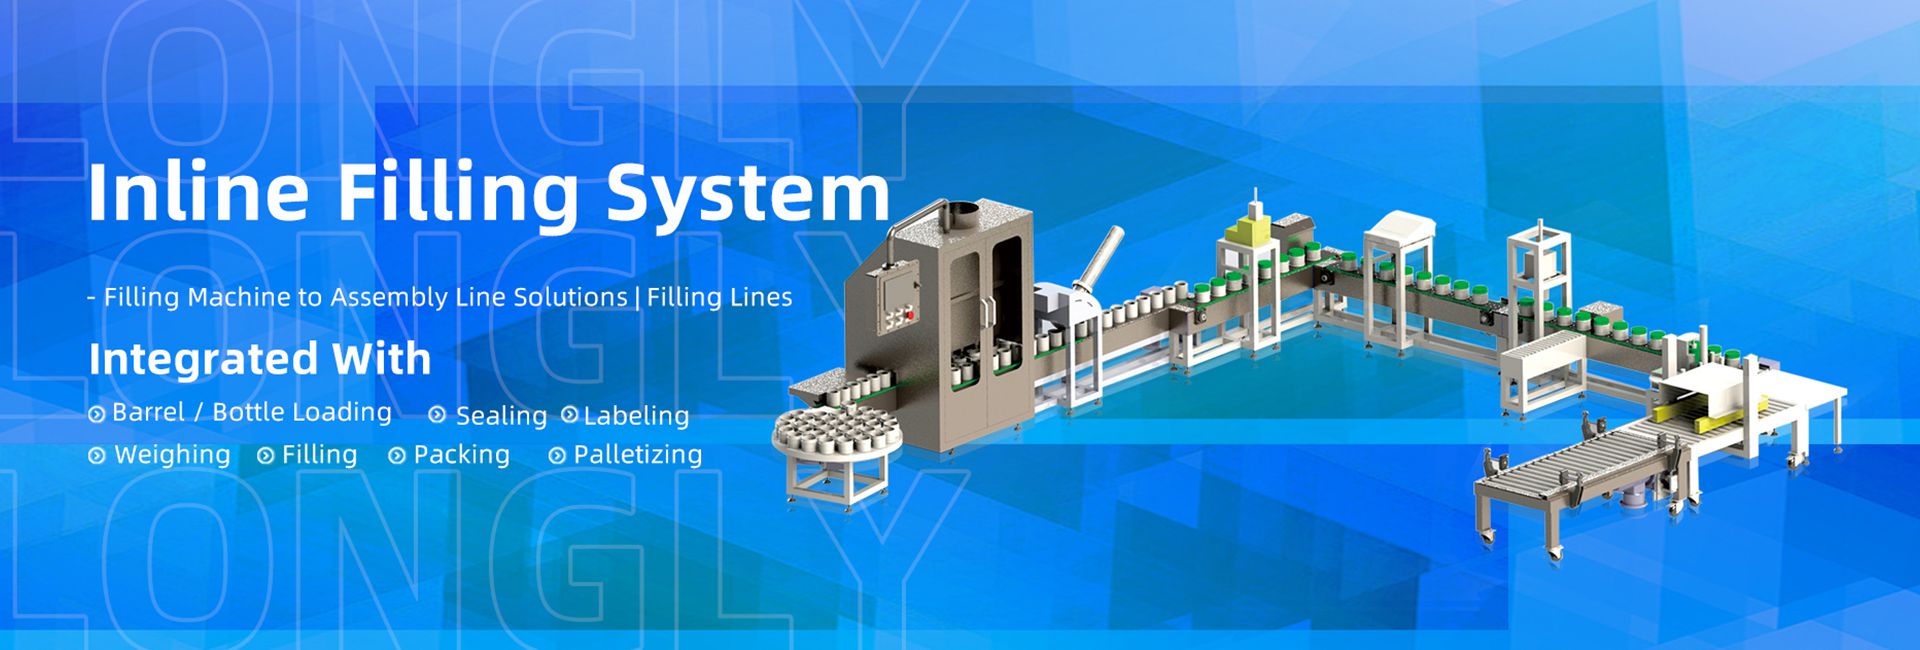 Inline Filling System and Filling Machines - LONGLY